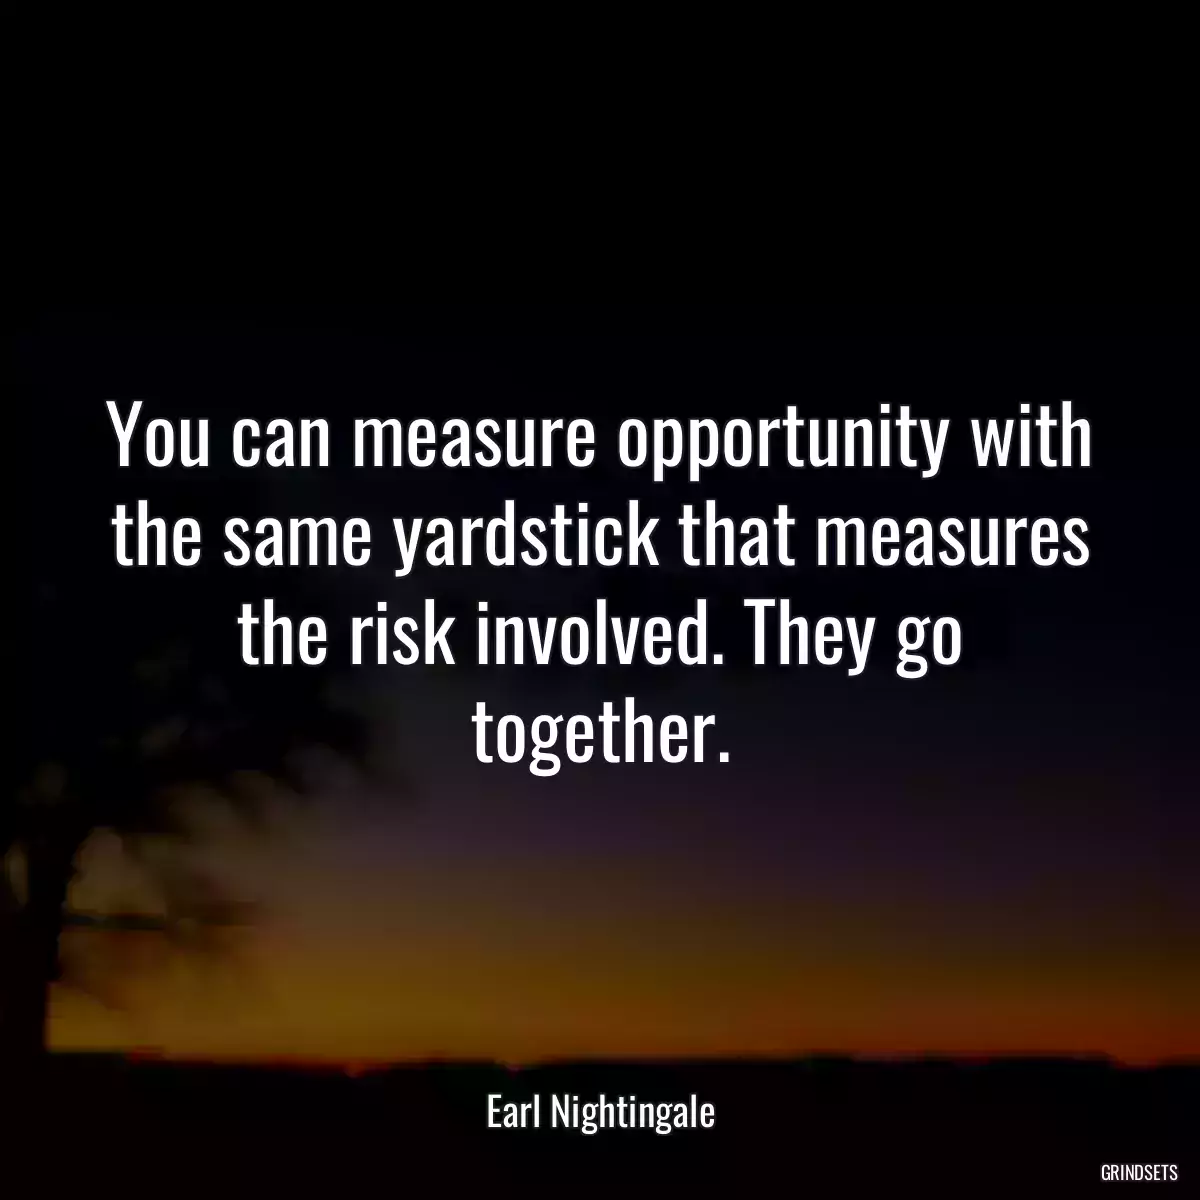 You can measure opportunity with the same yardstick that measures the risk involved. They go together.